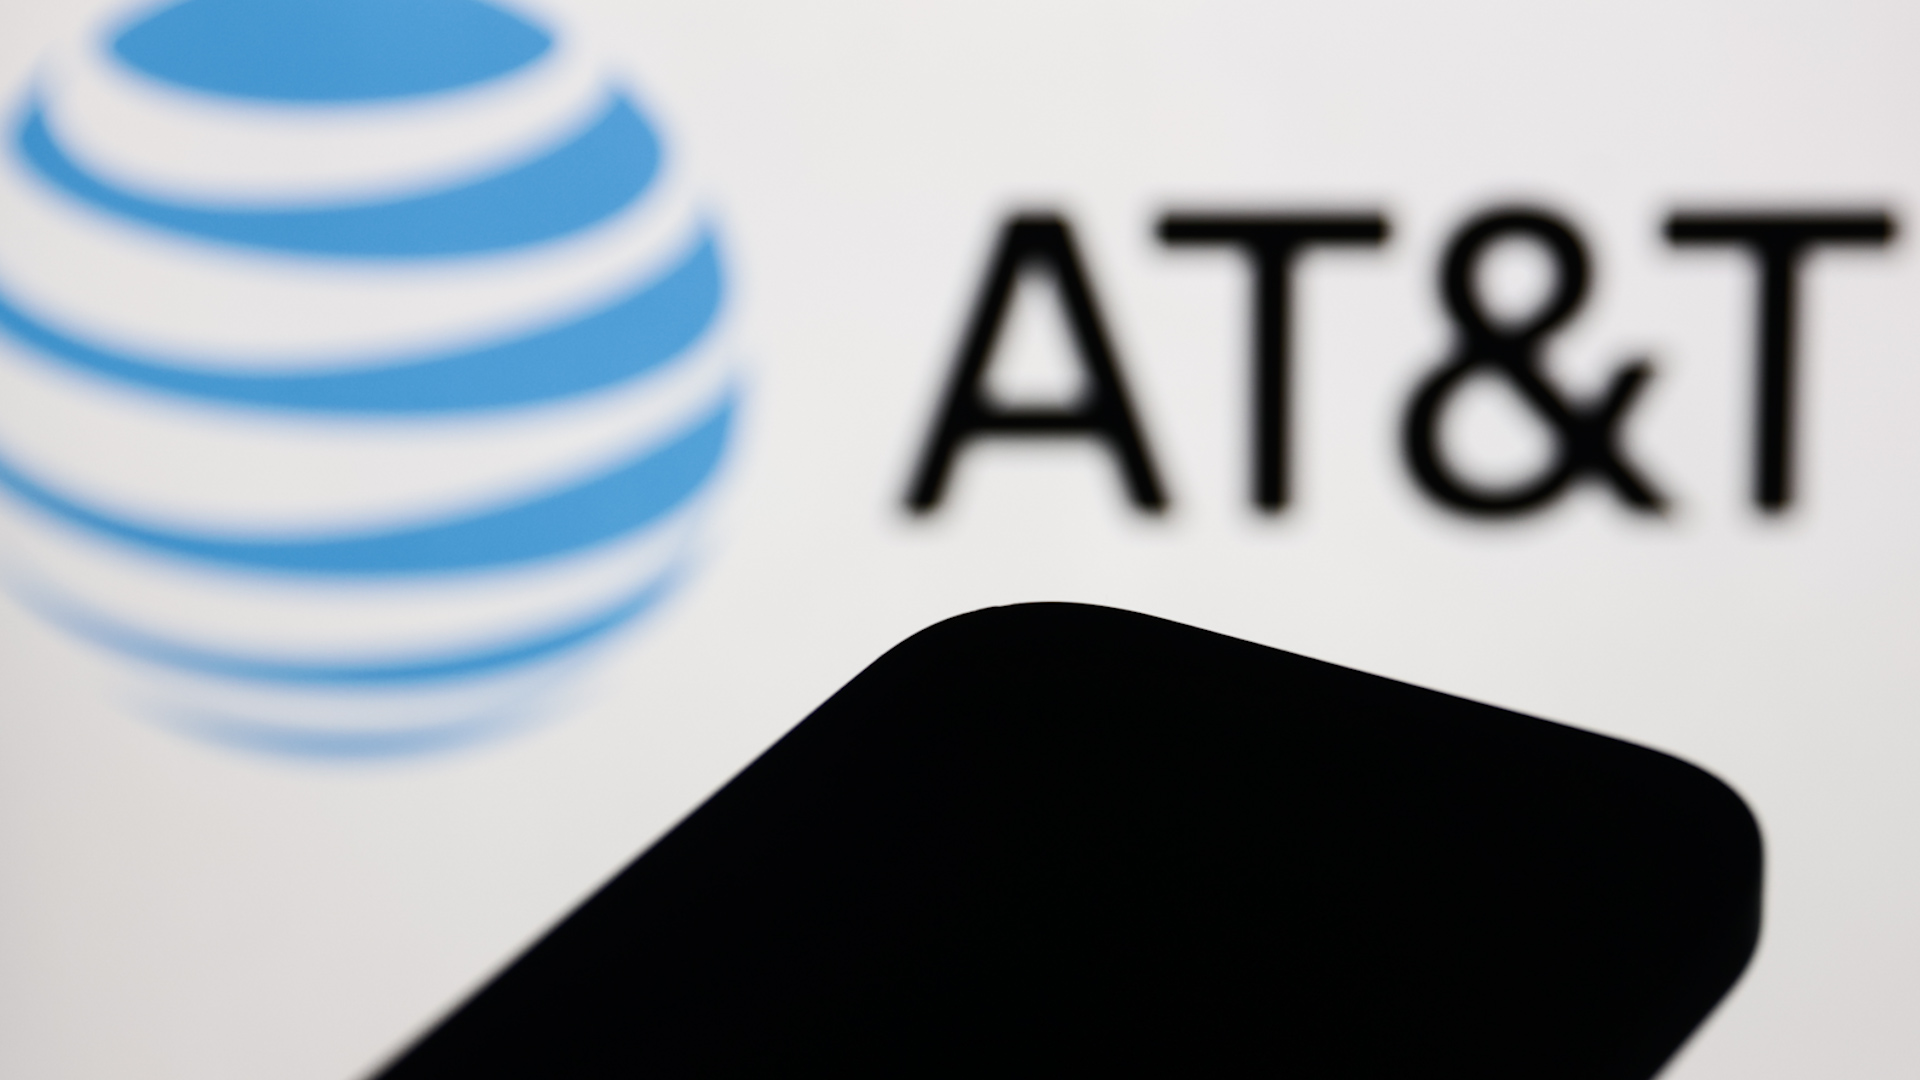 AT&T announced yesterday that it would offer a  service credit to some customers affected by last week’s cellphone service outage. The outage, which lasted more than seven hours, impacted over 70,000 users, the company disclosed in a letter to employees.